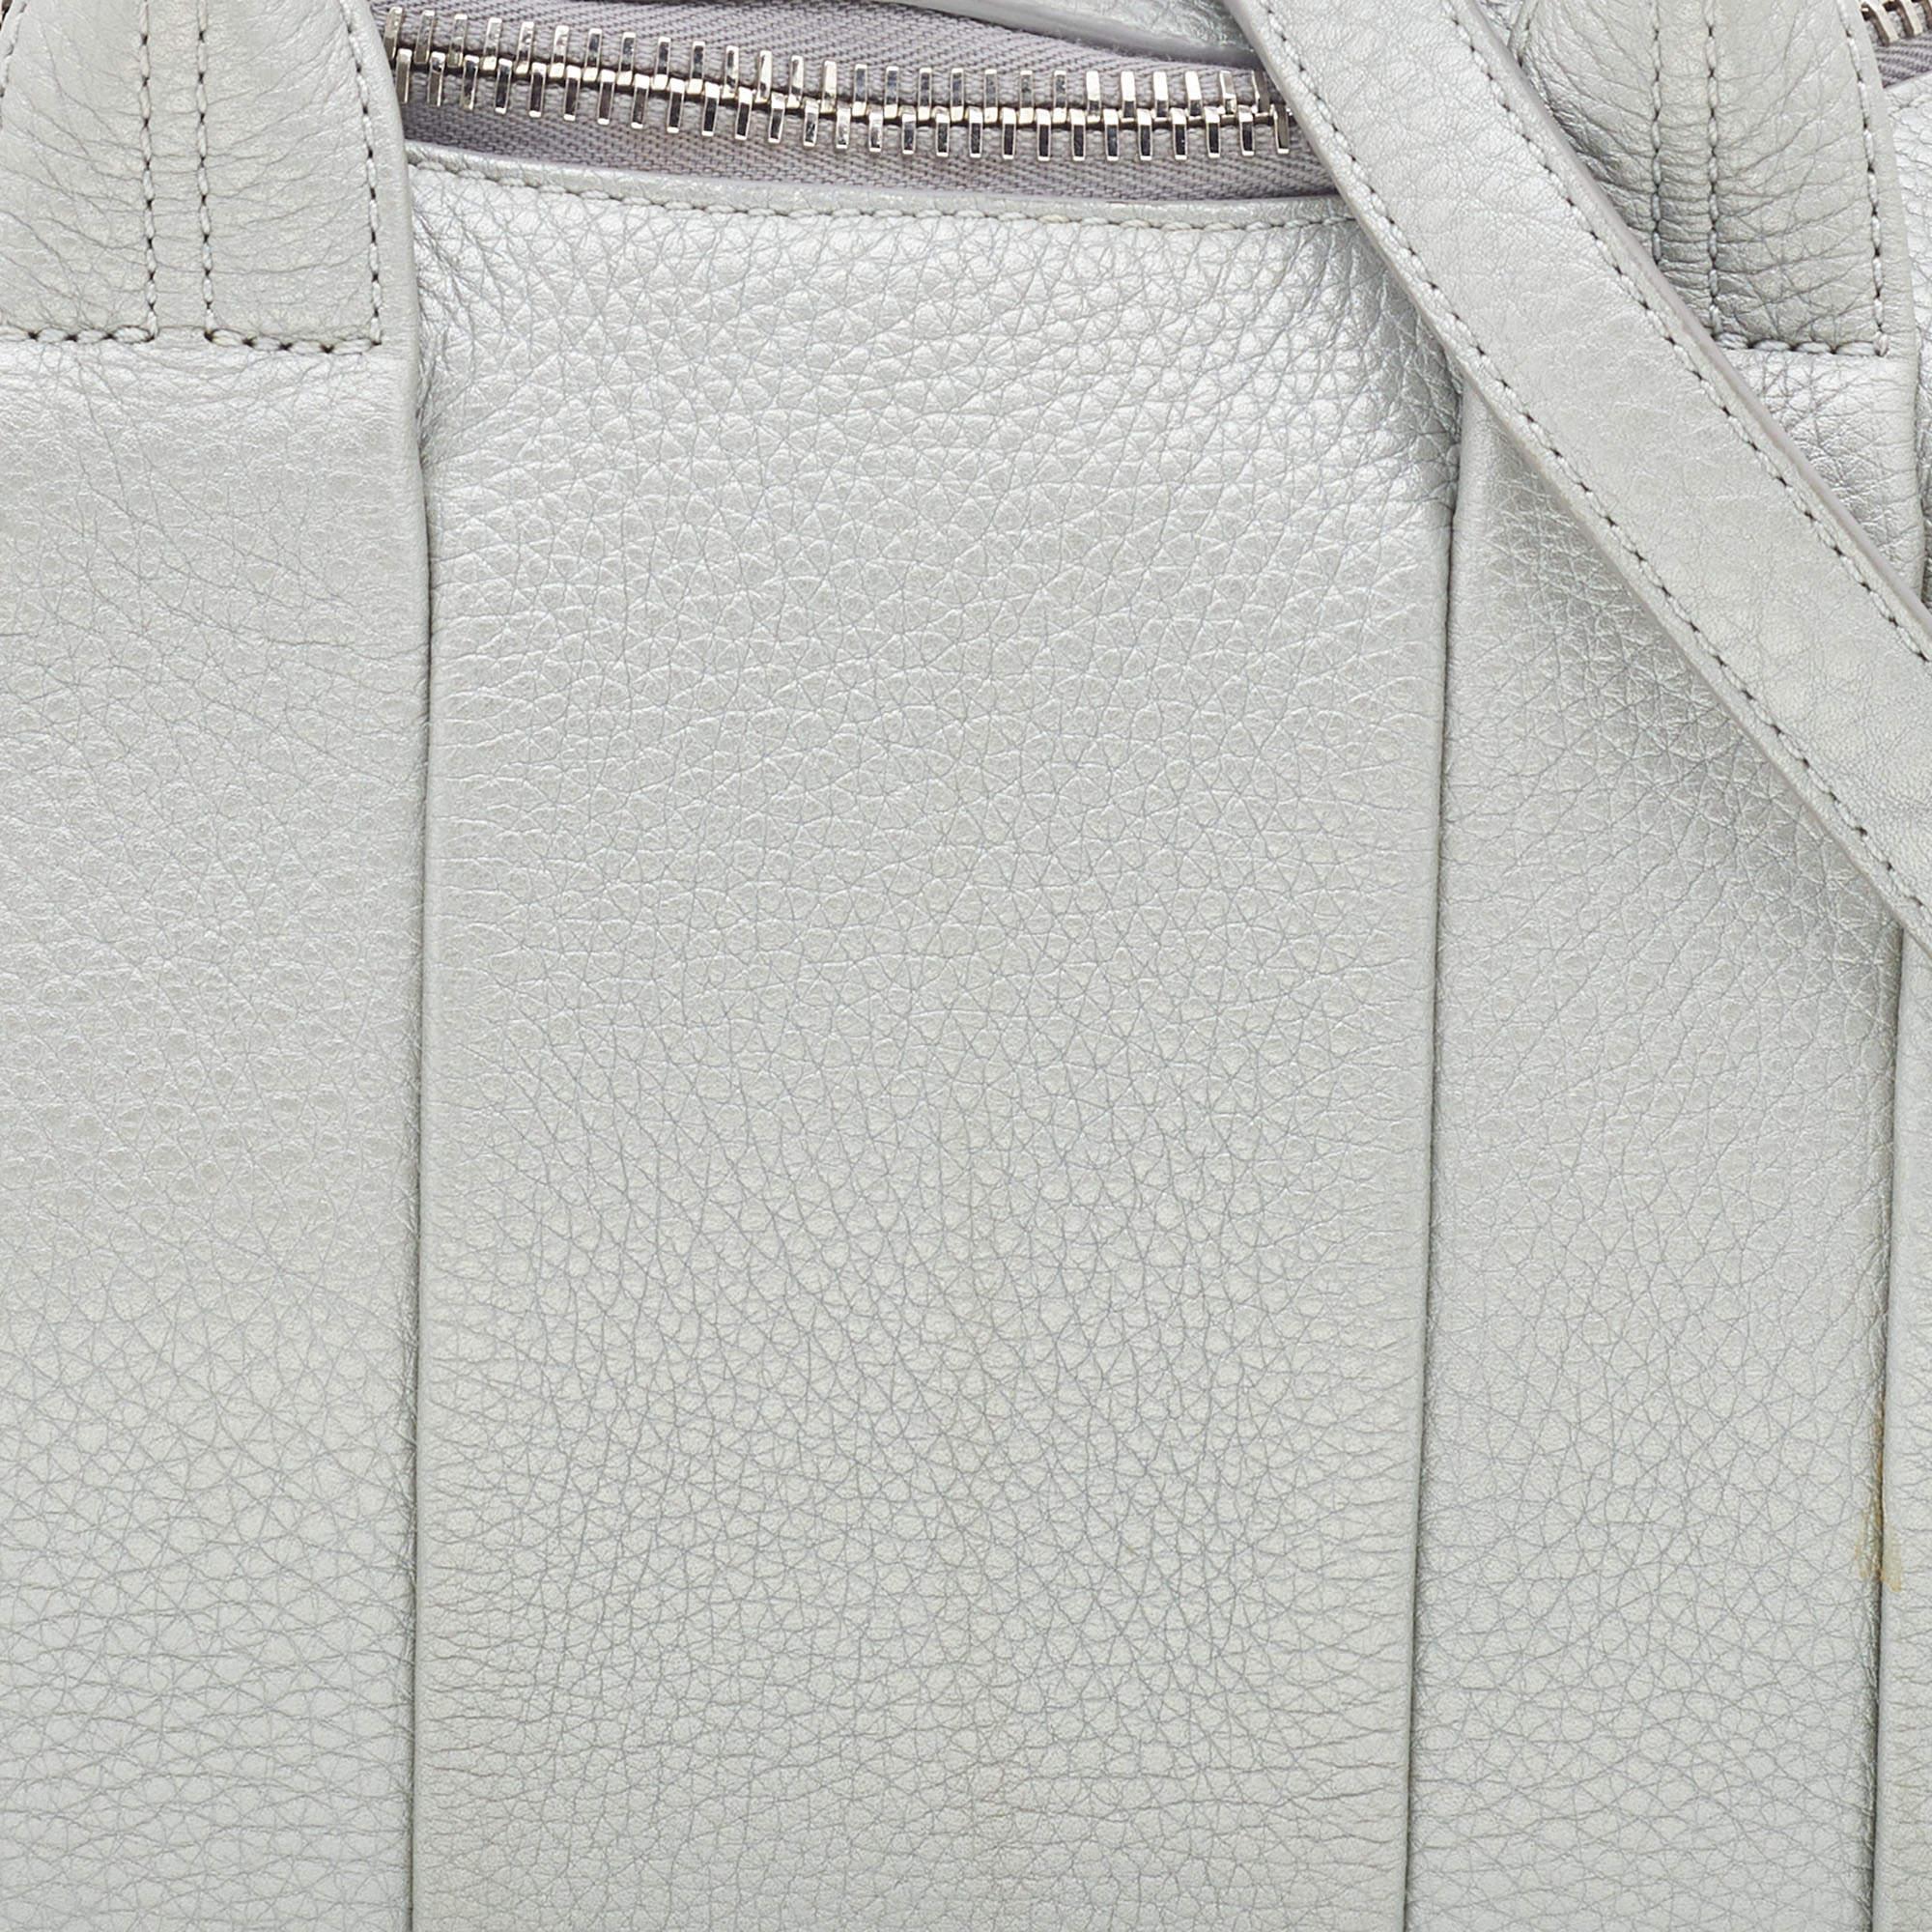 Alexander Wang Silver Textured Leather Rocco Bag 4